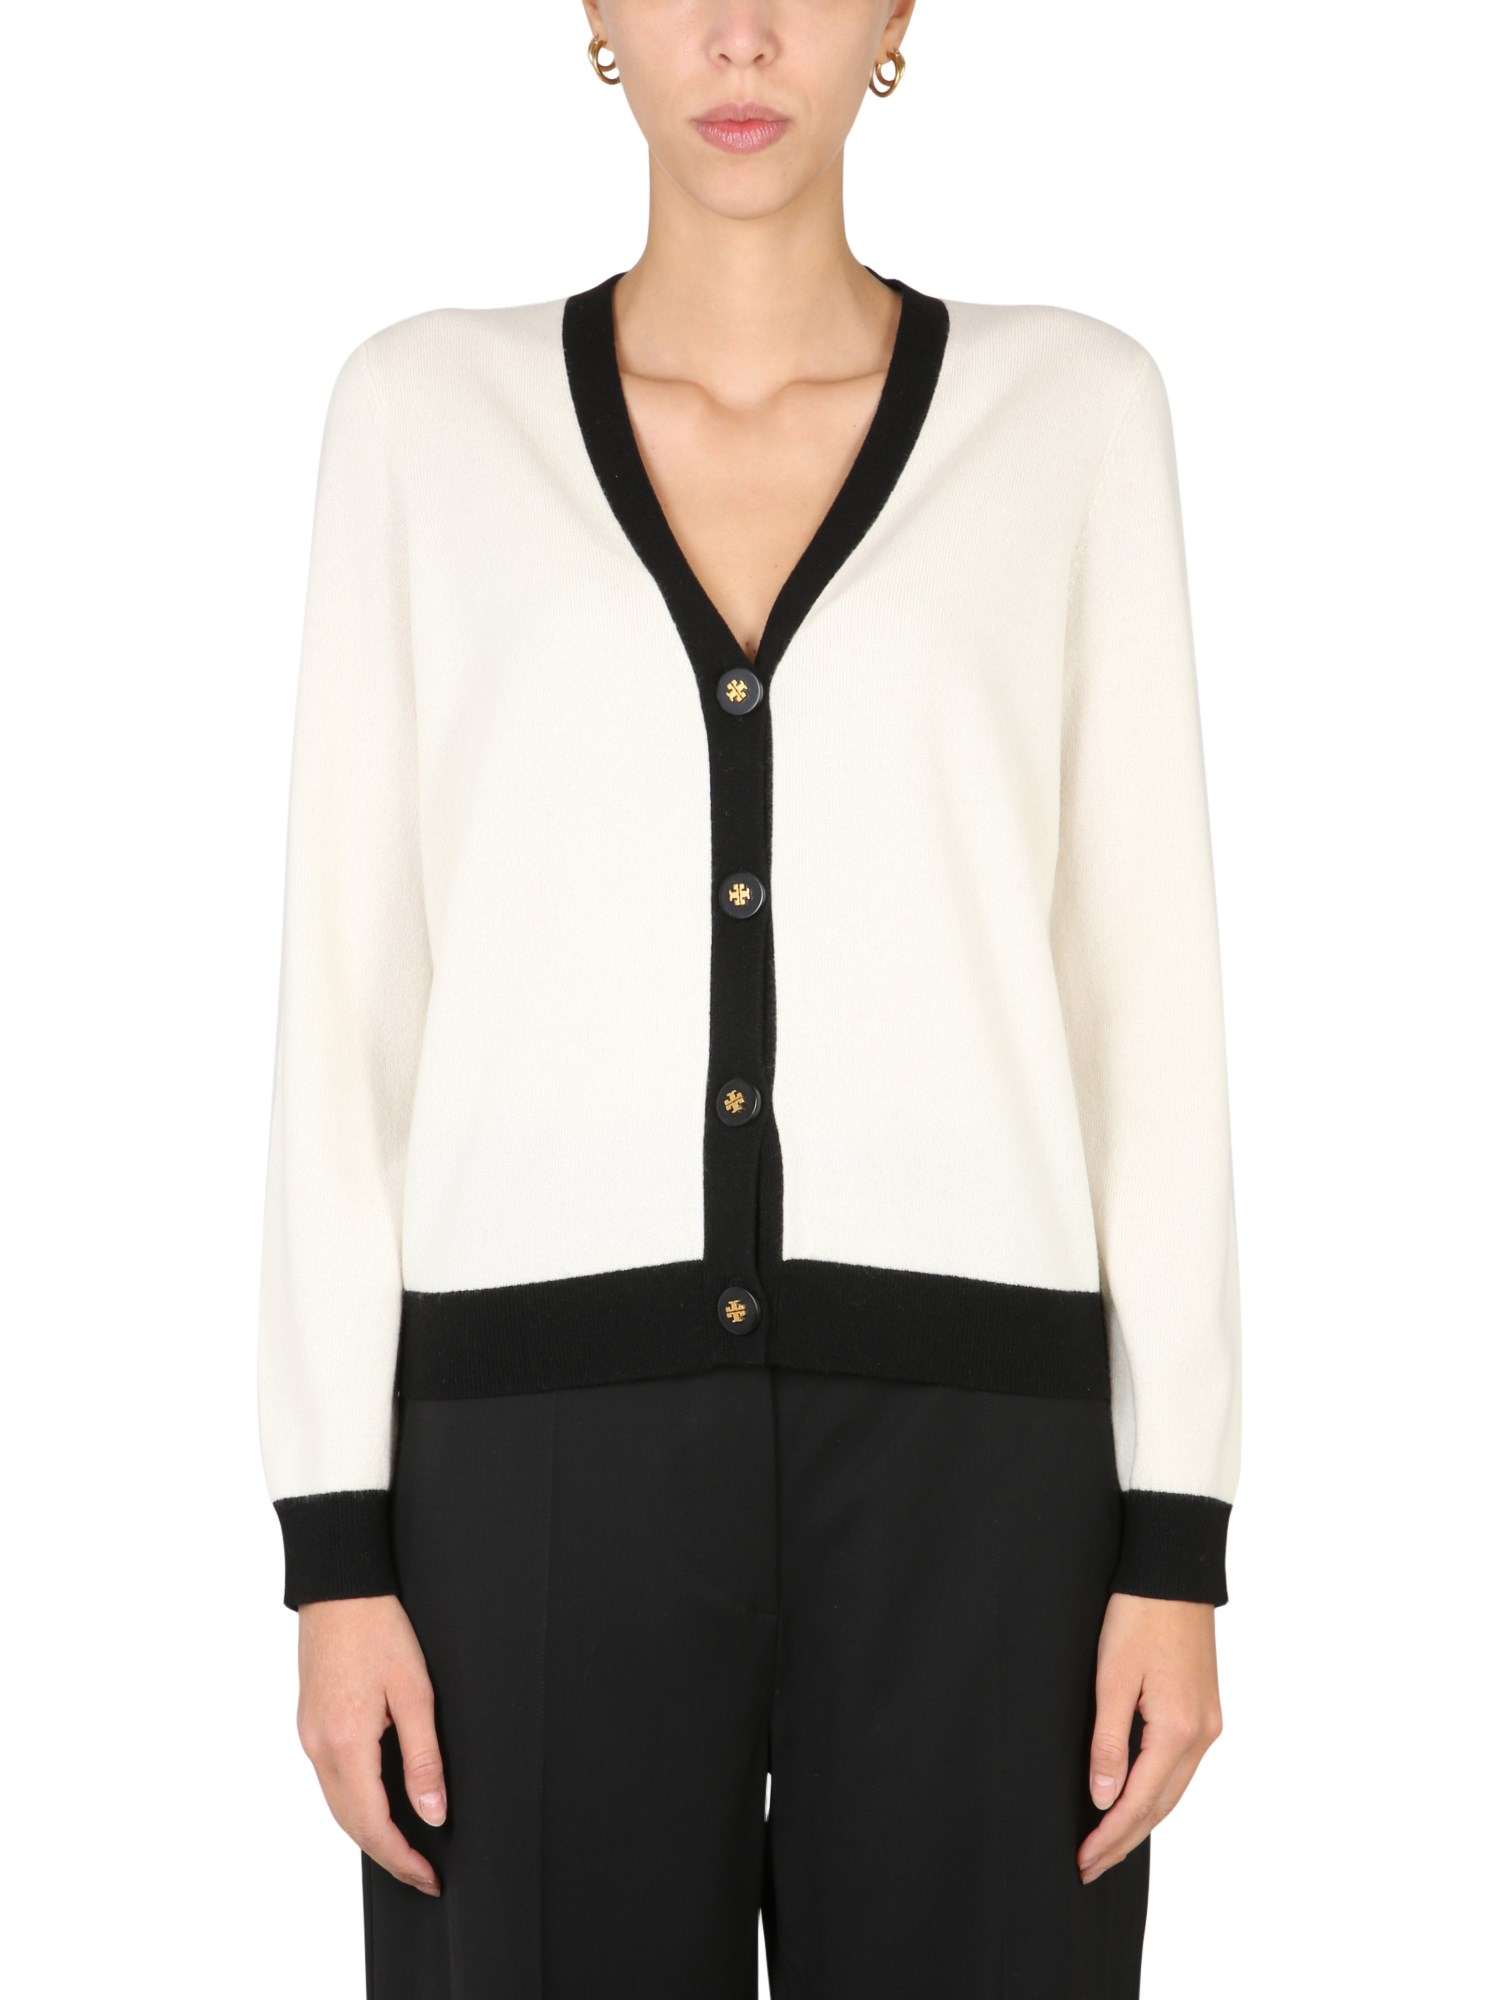 tory burch cardigan with contrasting finish